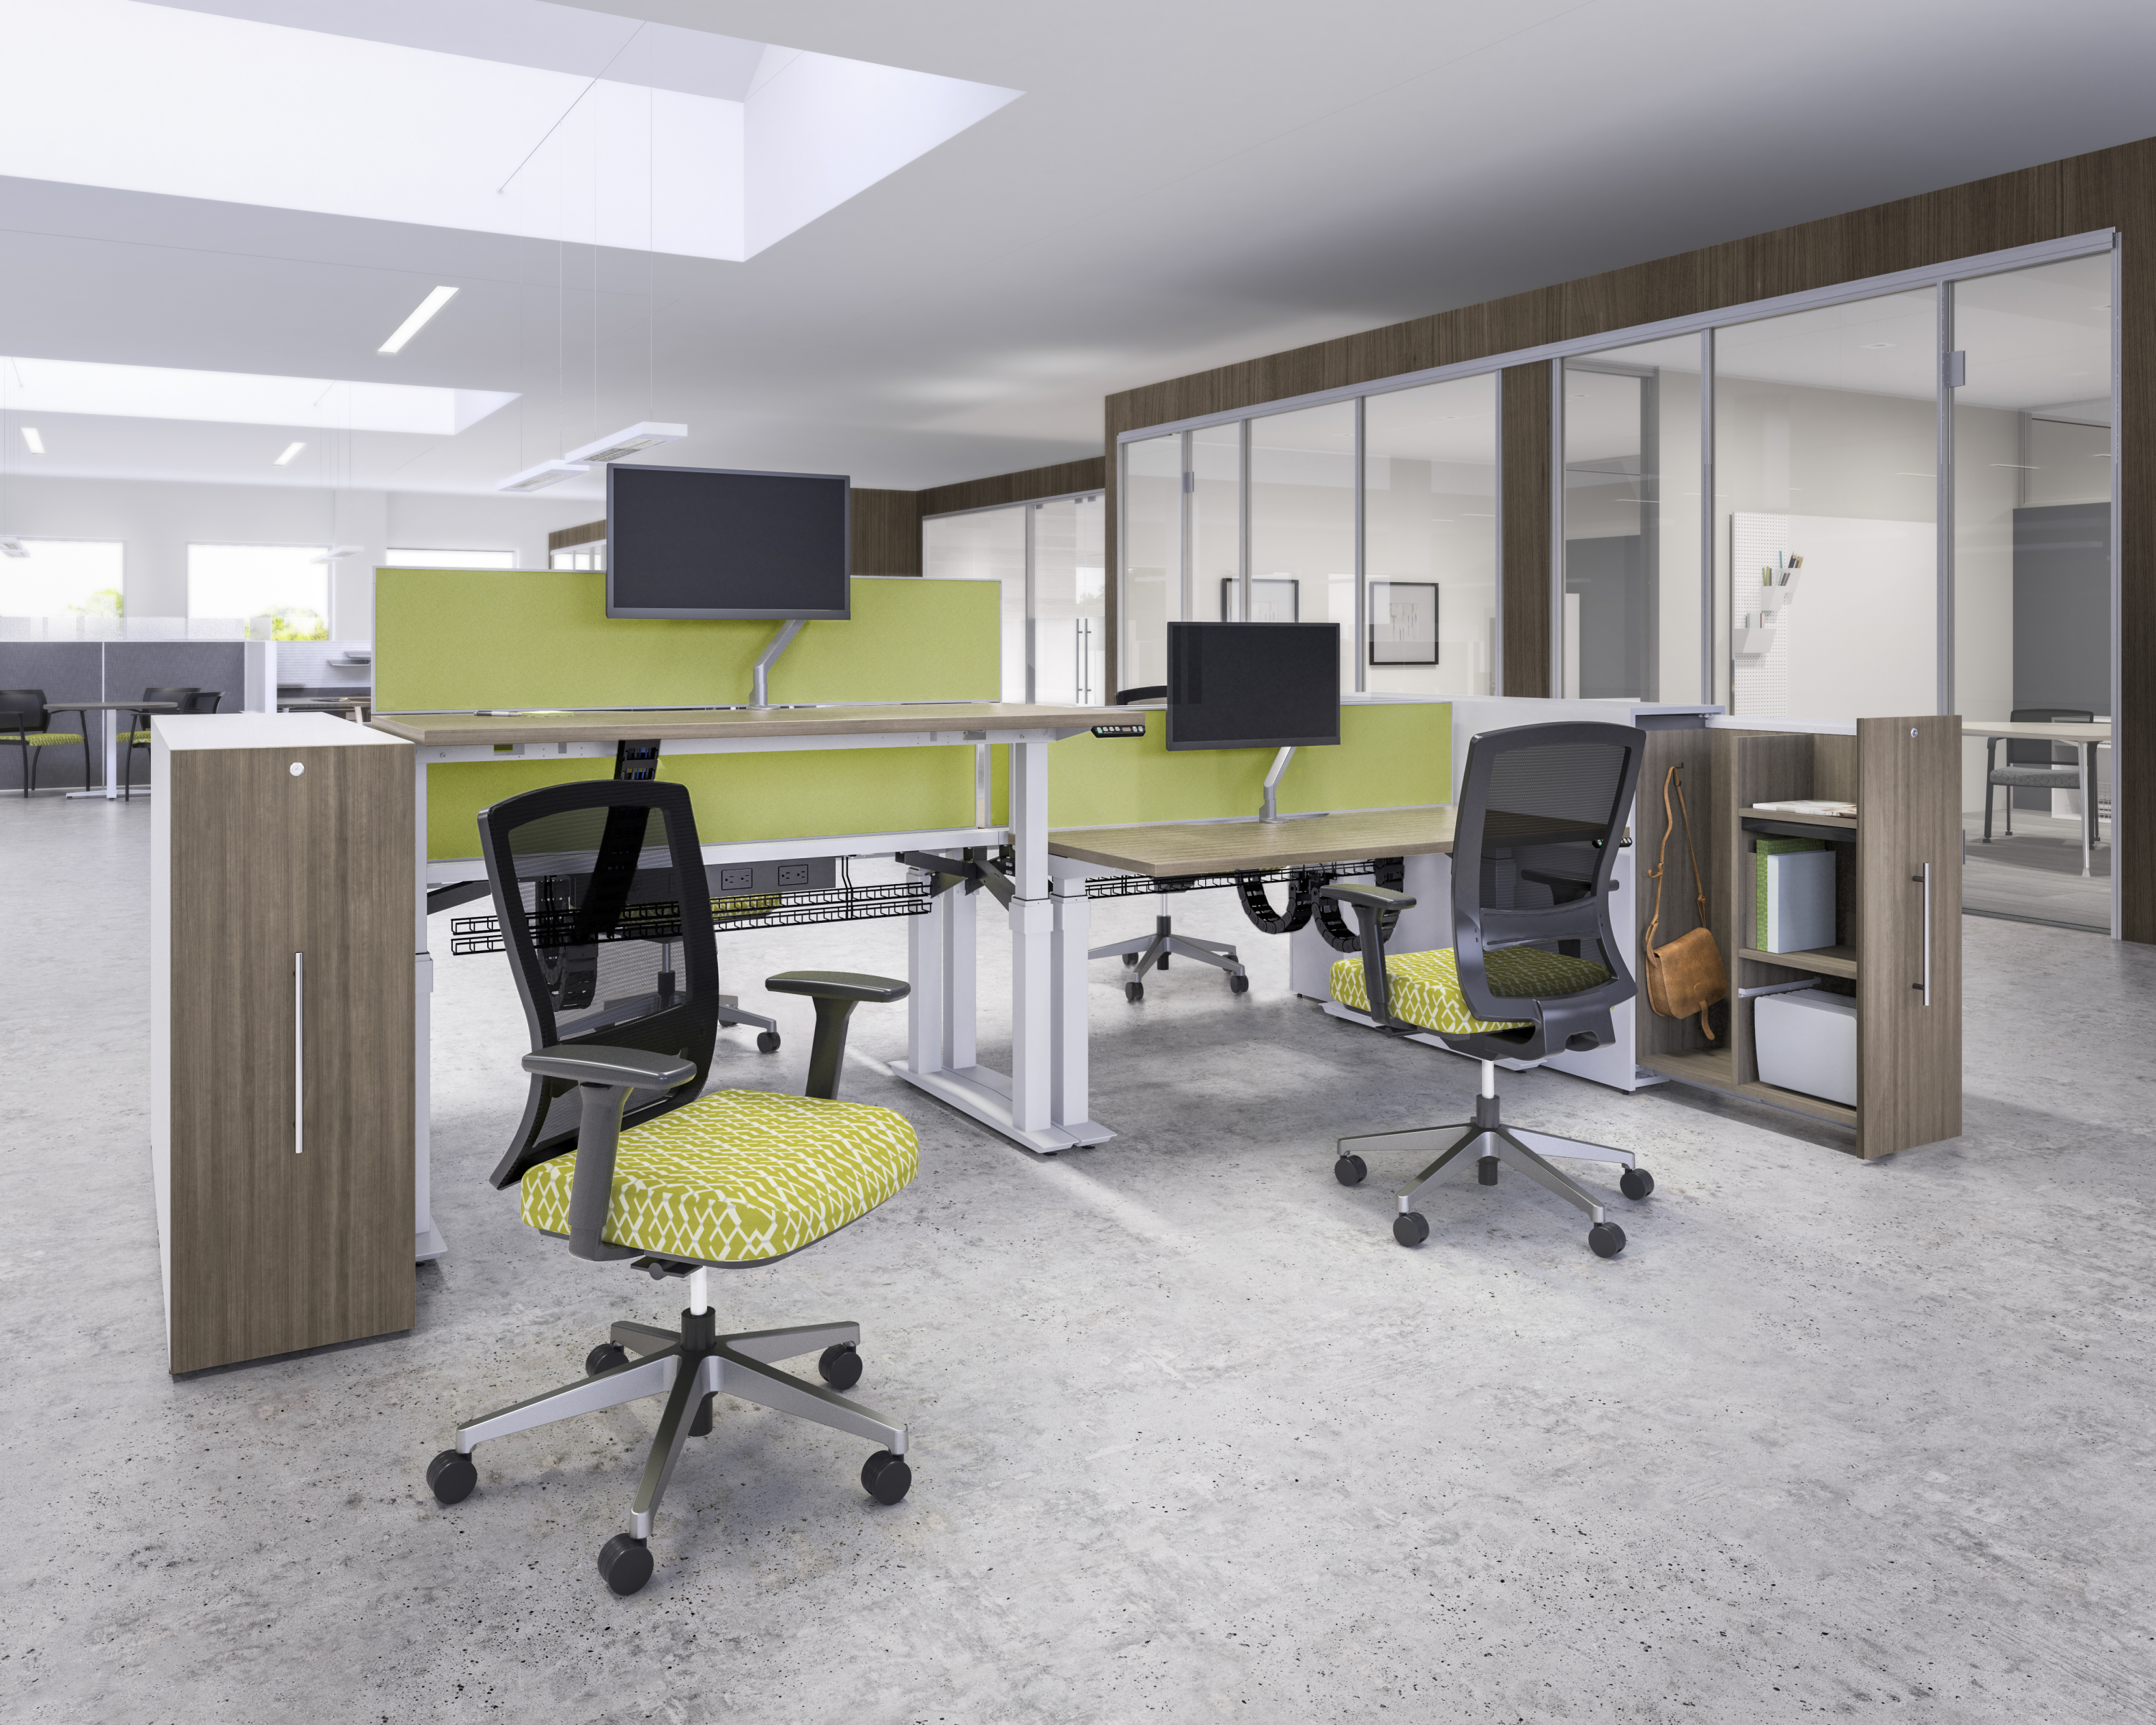 aloft-height-adjustable-desking-with-calibrate-pullout-storage-and-natick-task-seating_lg